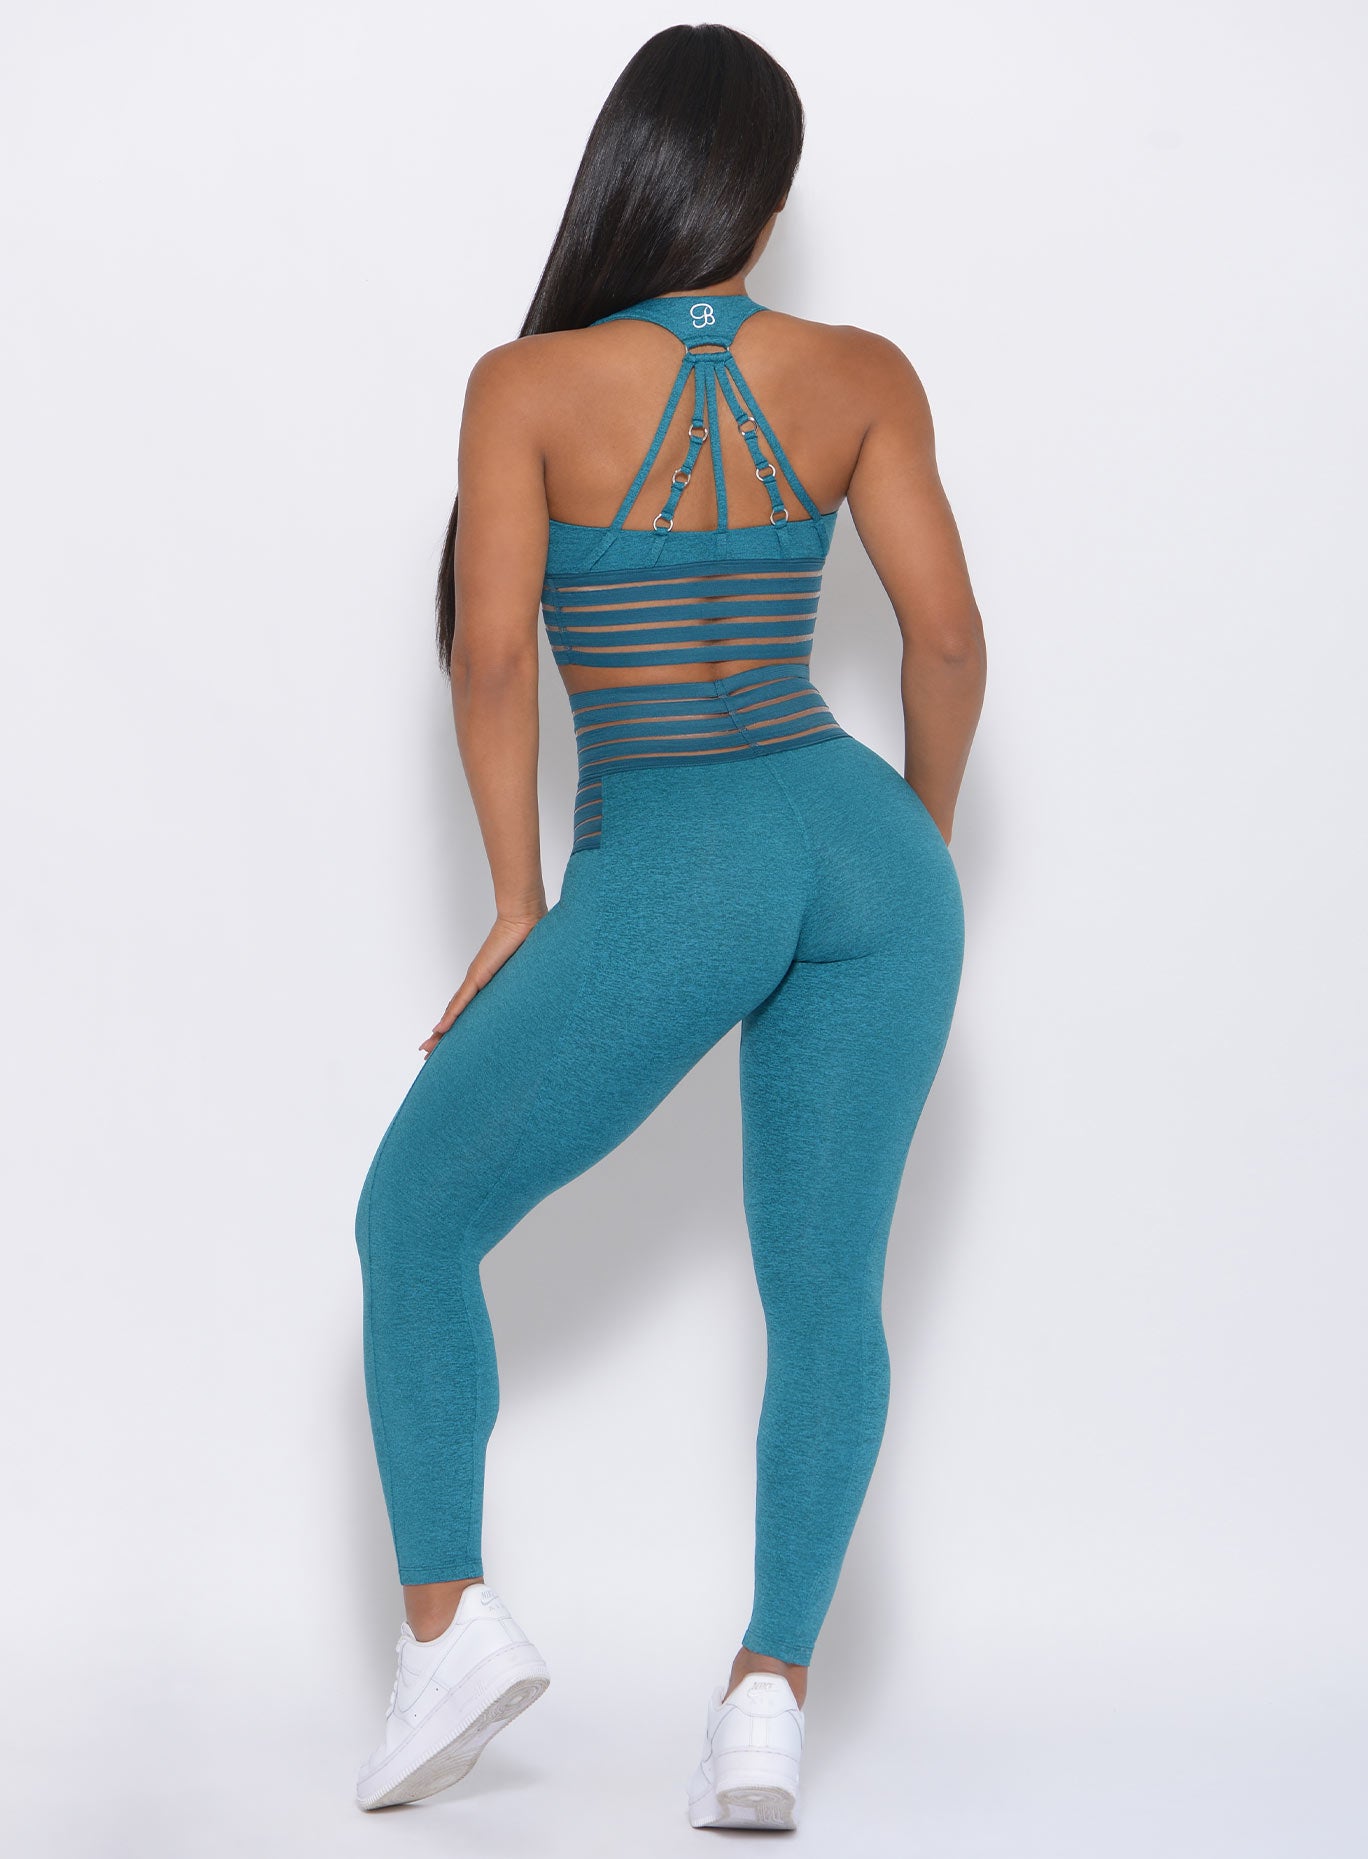 Back profile of the model  in our statement leggings in seafoam color and a matching bra